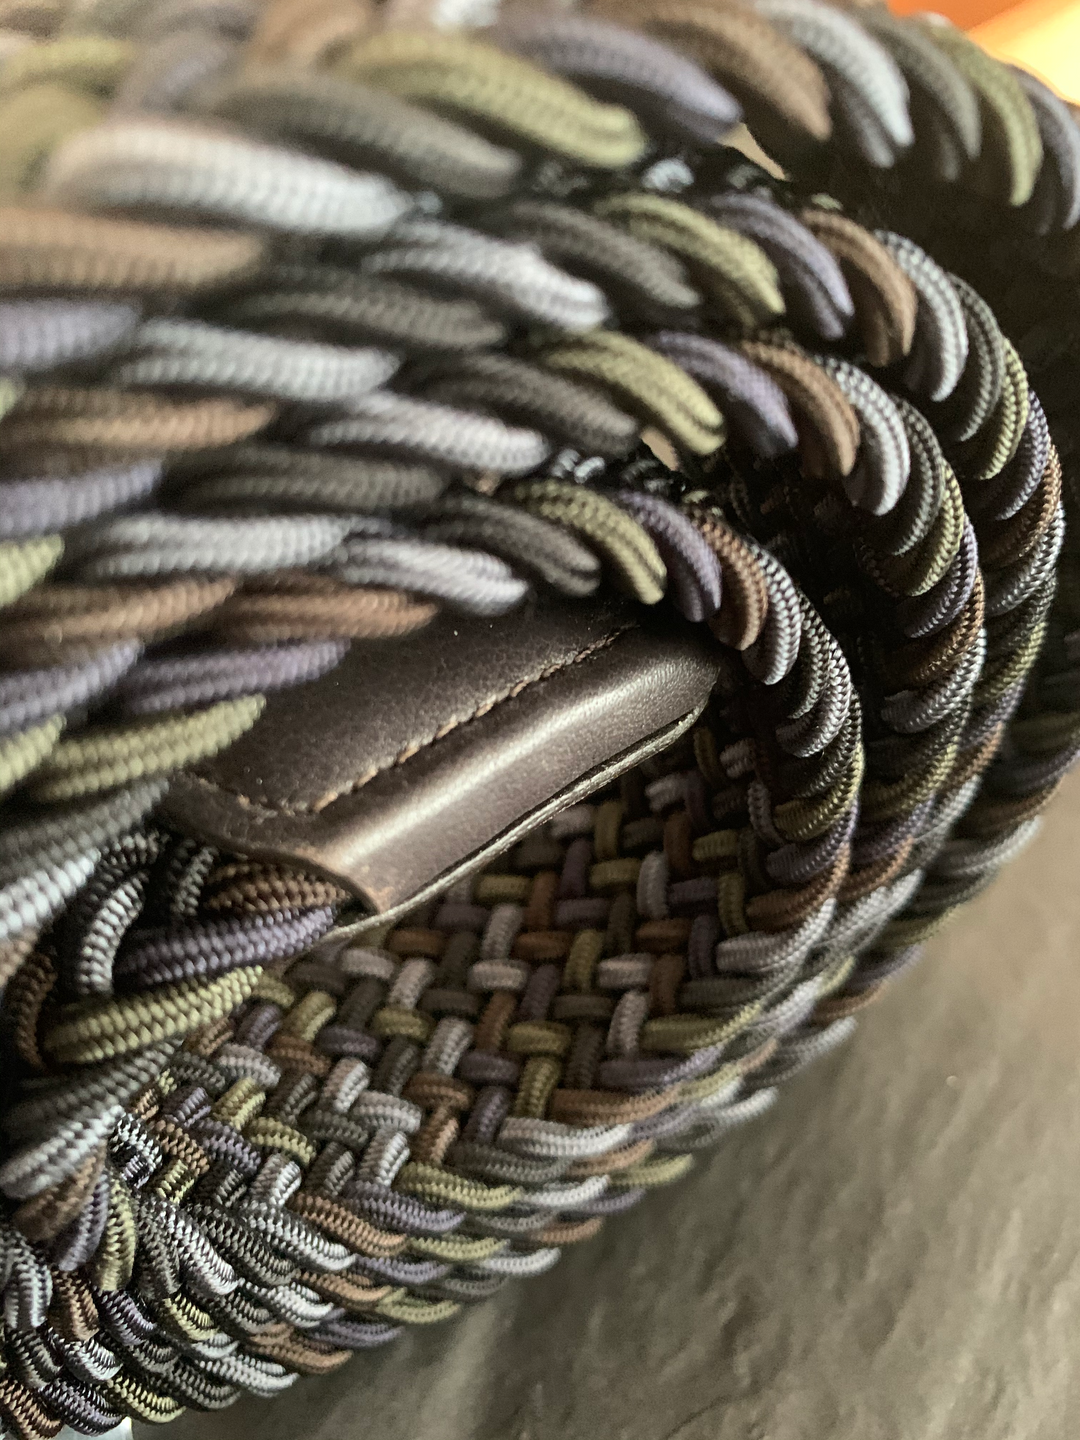 Anderson's Multi-Colour Stretch Woven Belt in Navy/Grey/Green/Brown | Buster McGee Daylesford